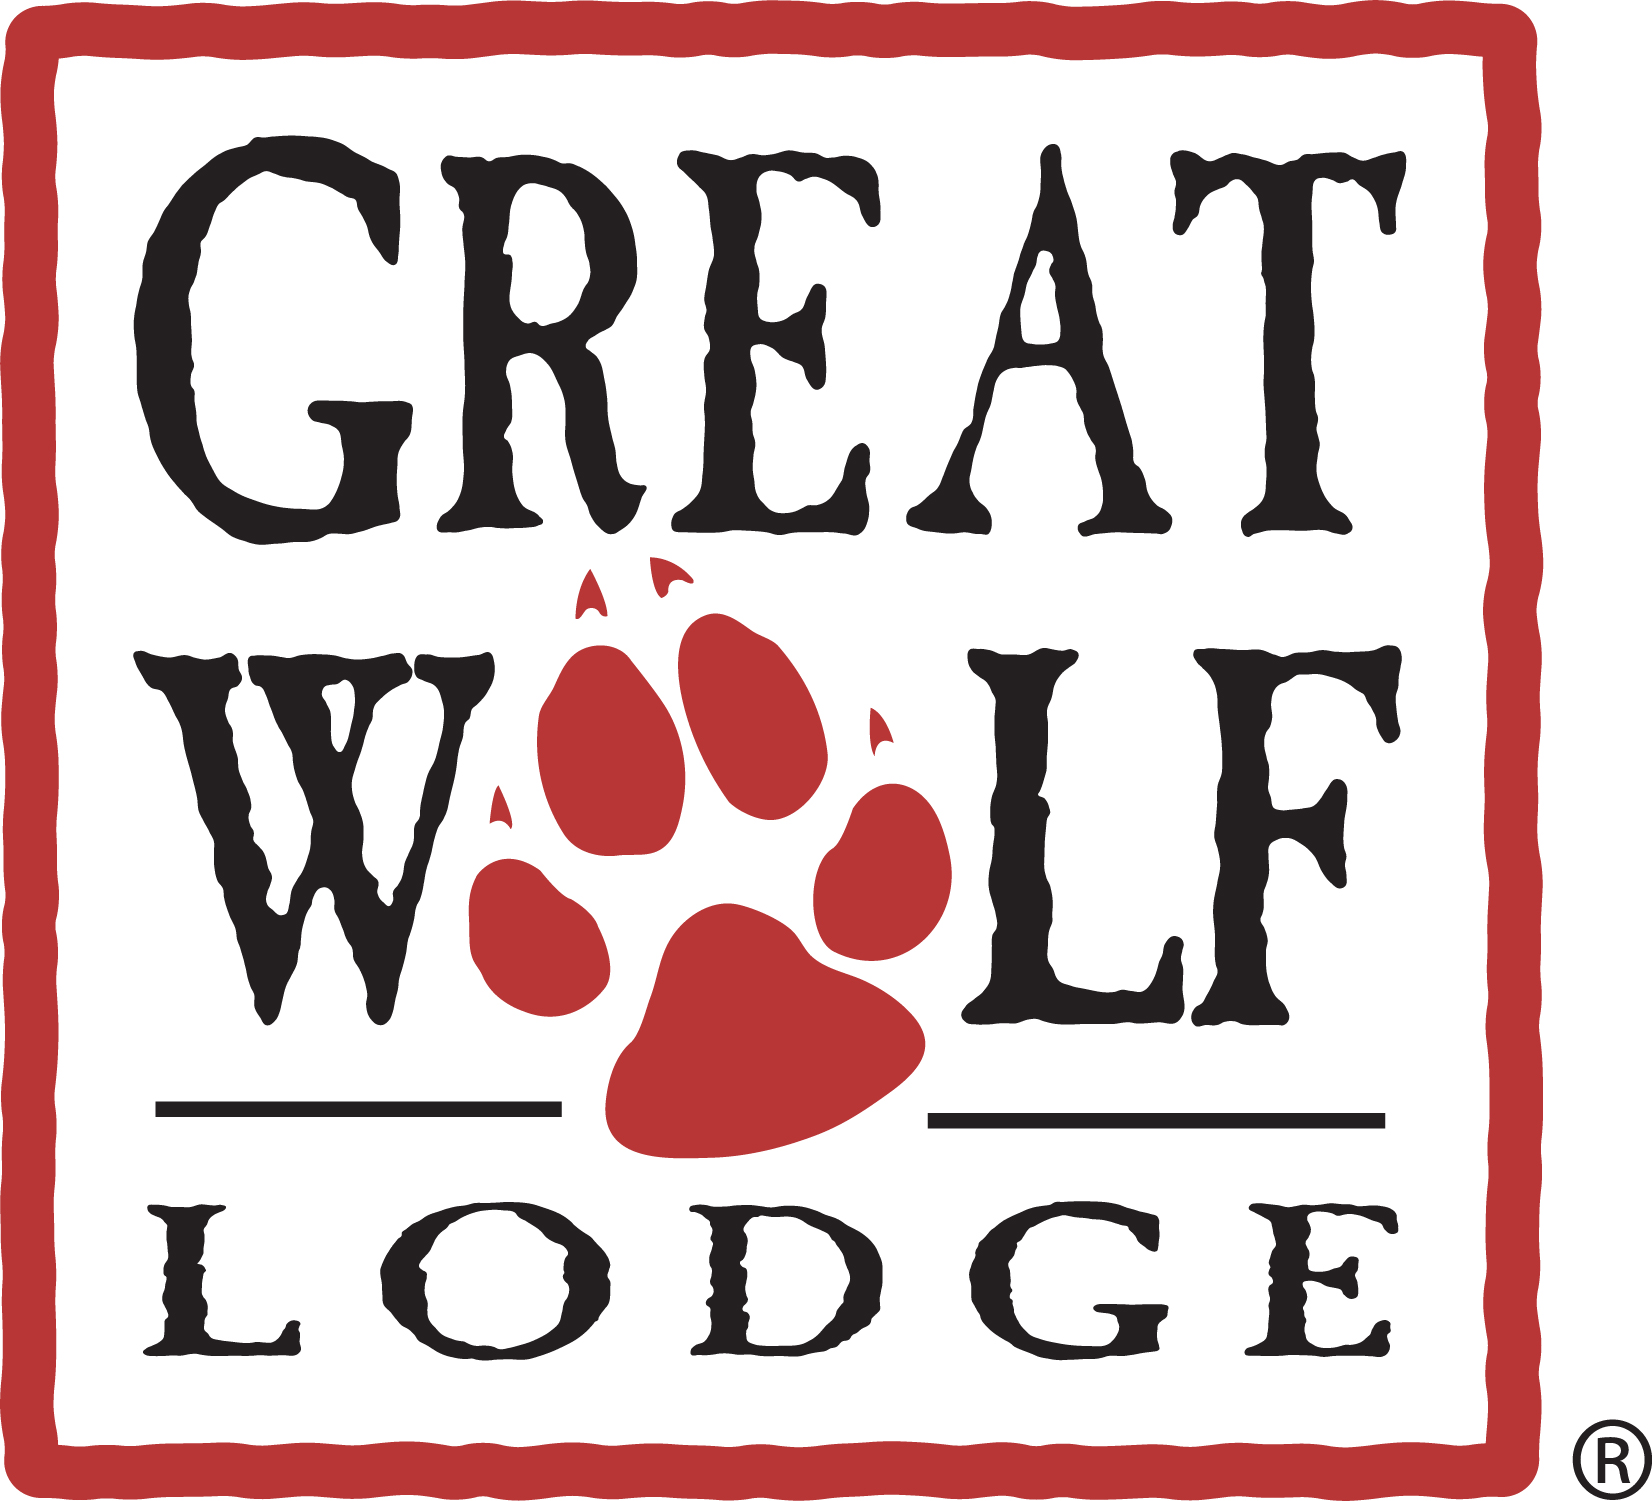 apollo-acquires-great-wolf-lodge-amusement-today